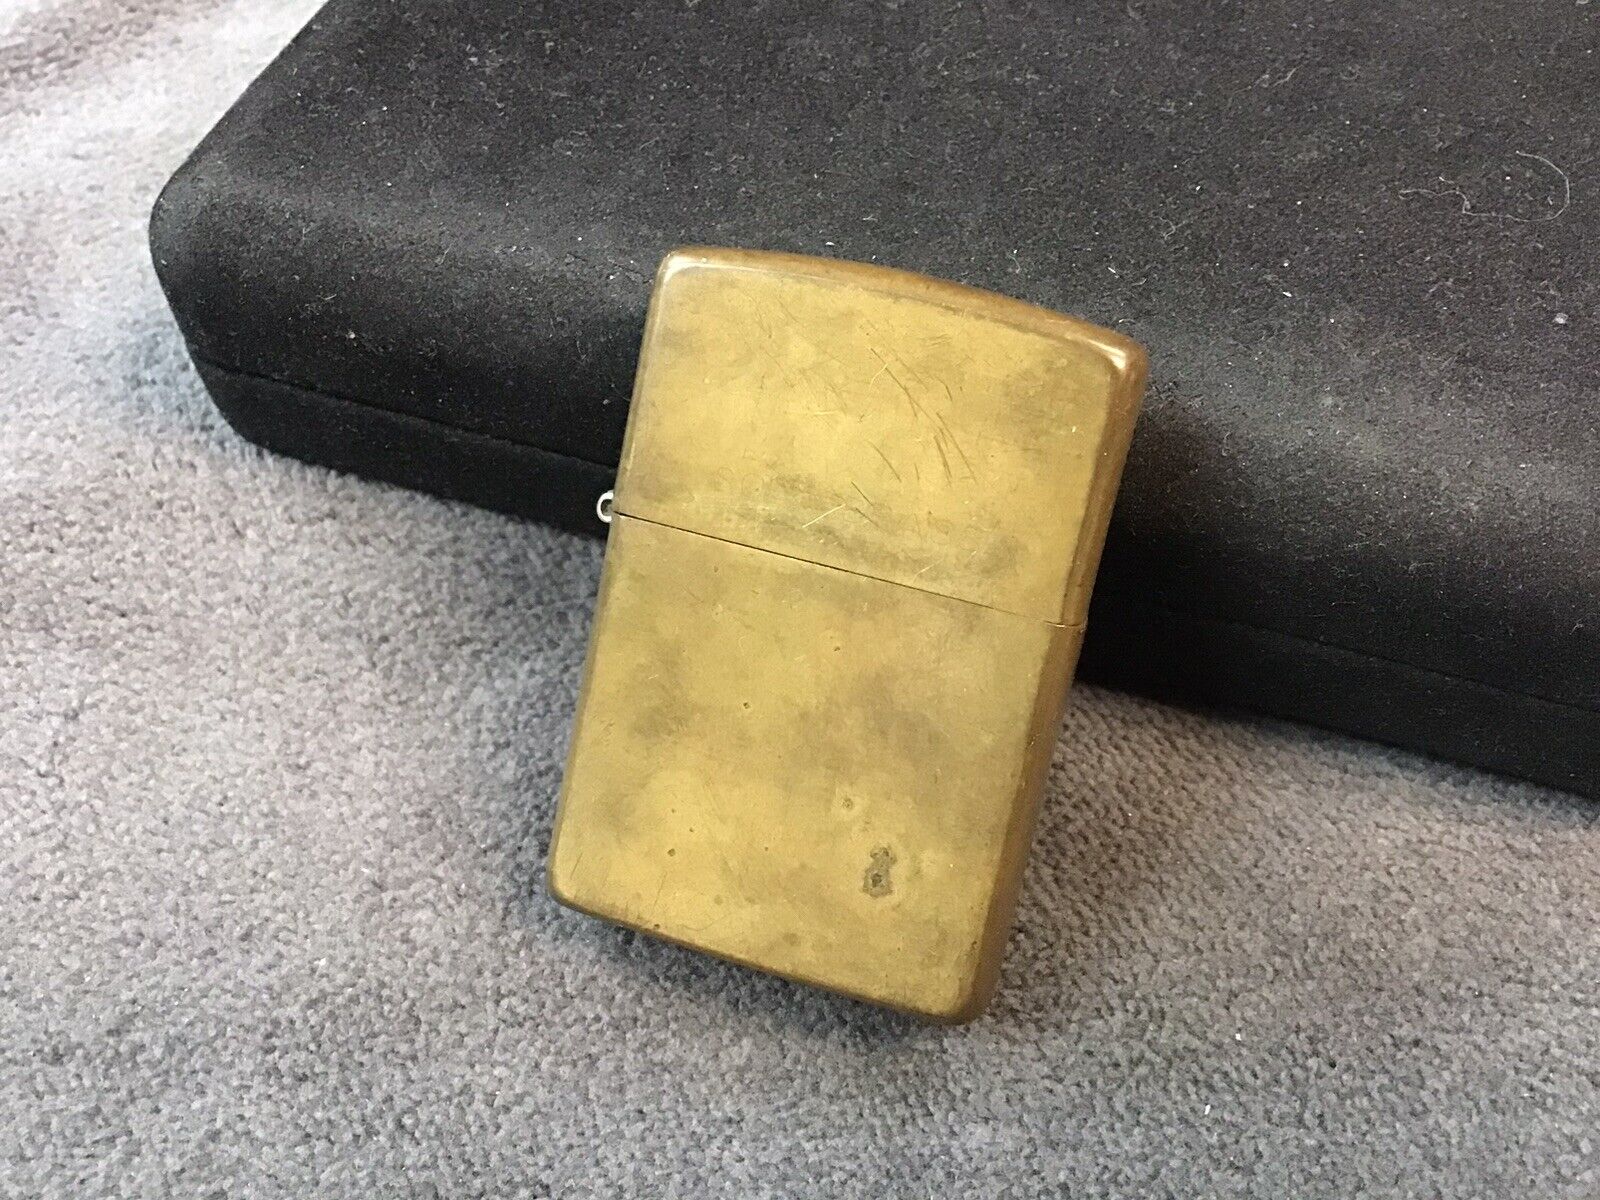 Vintage 1995 Zippo Lighter, Full Size, Solid Brass, Used, All Original